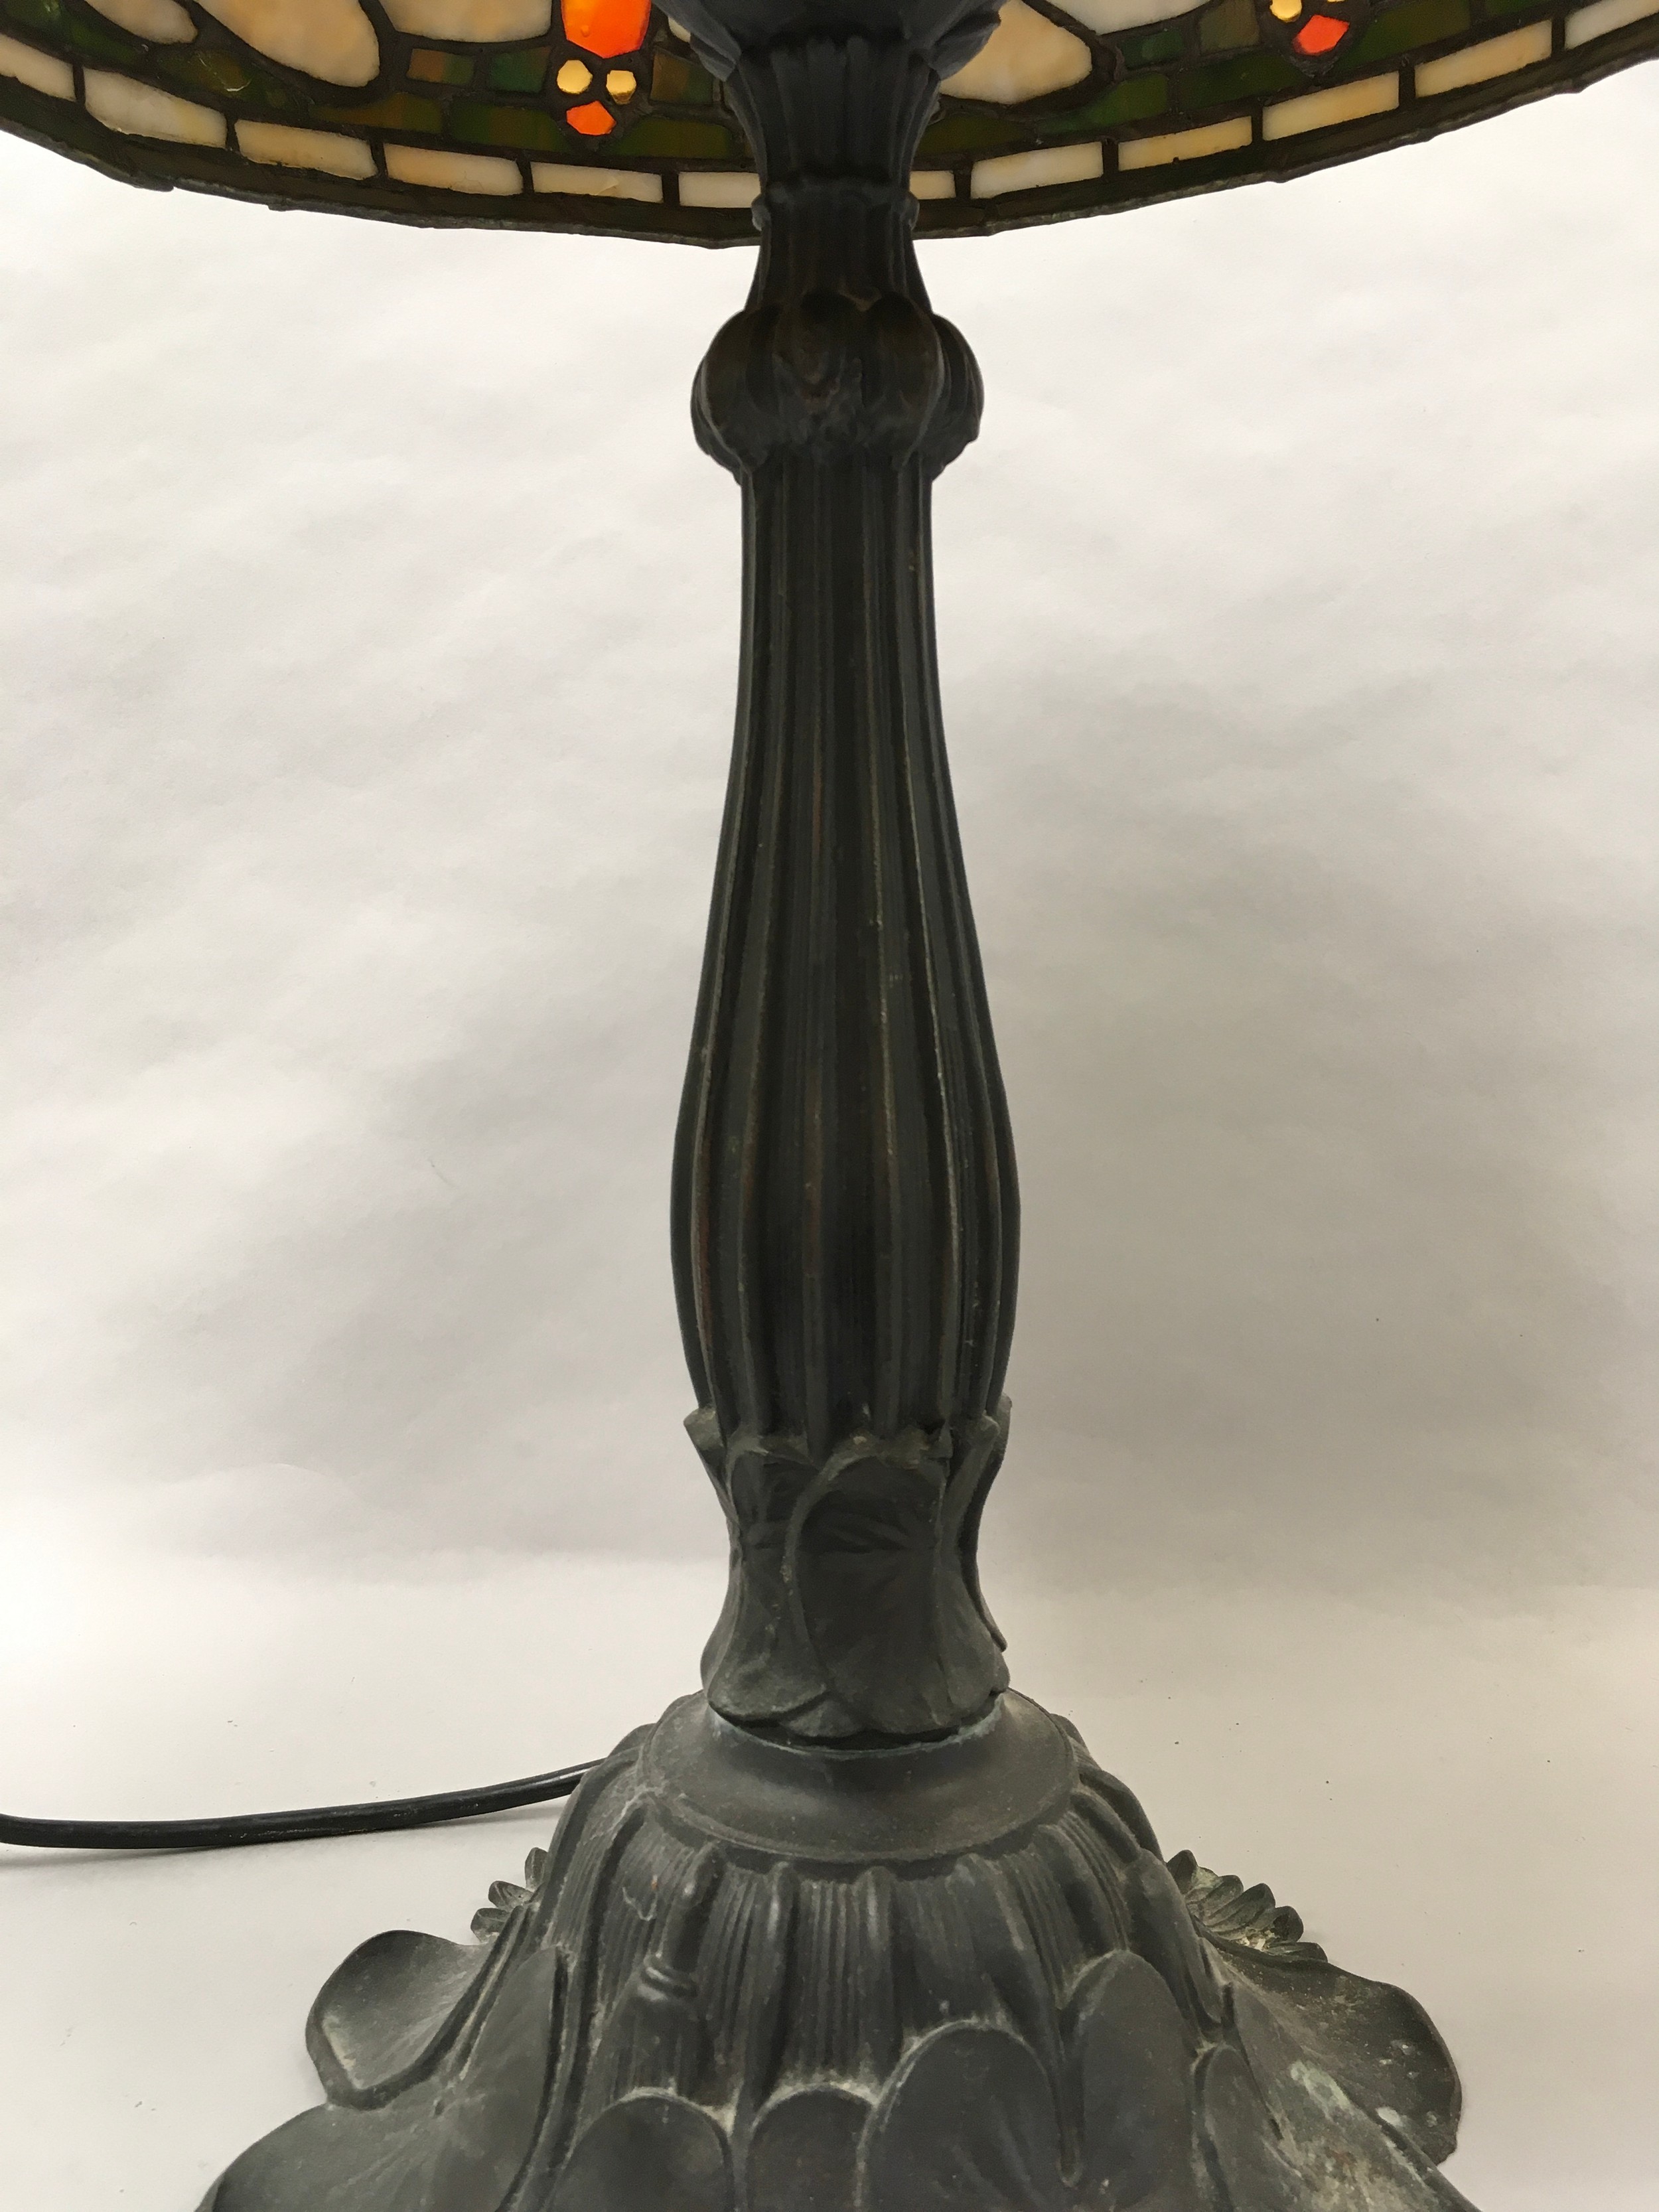 Tiffany style electric table lamp 70x40cm - Image 5 of 6